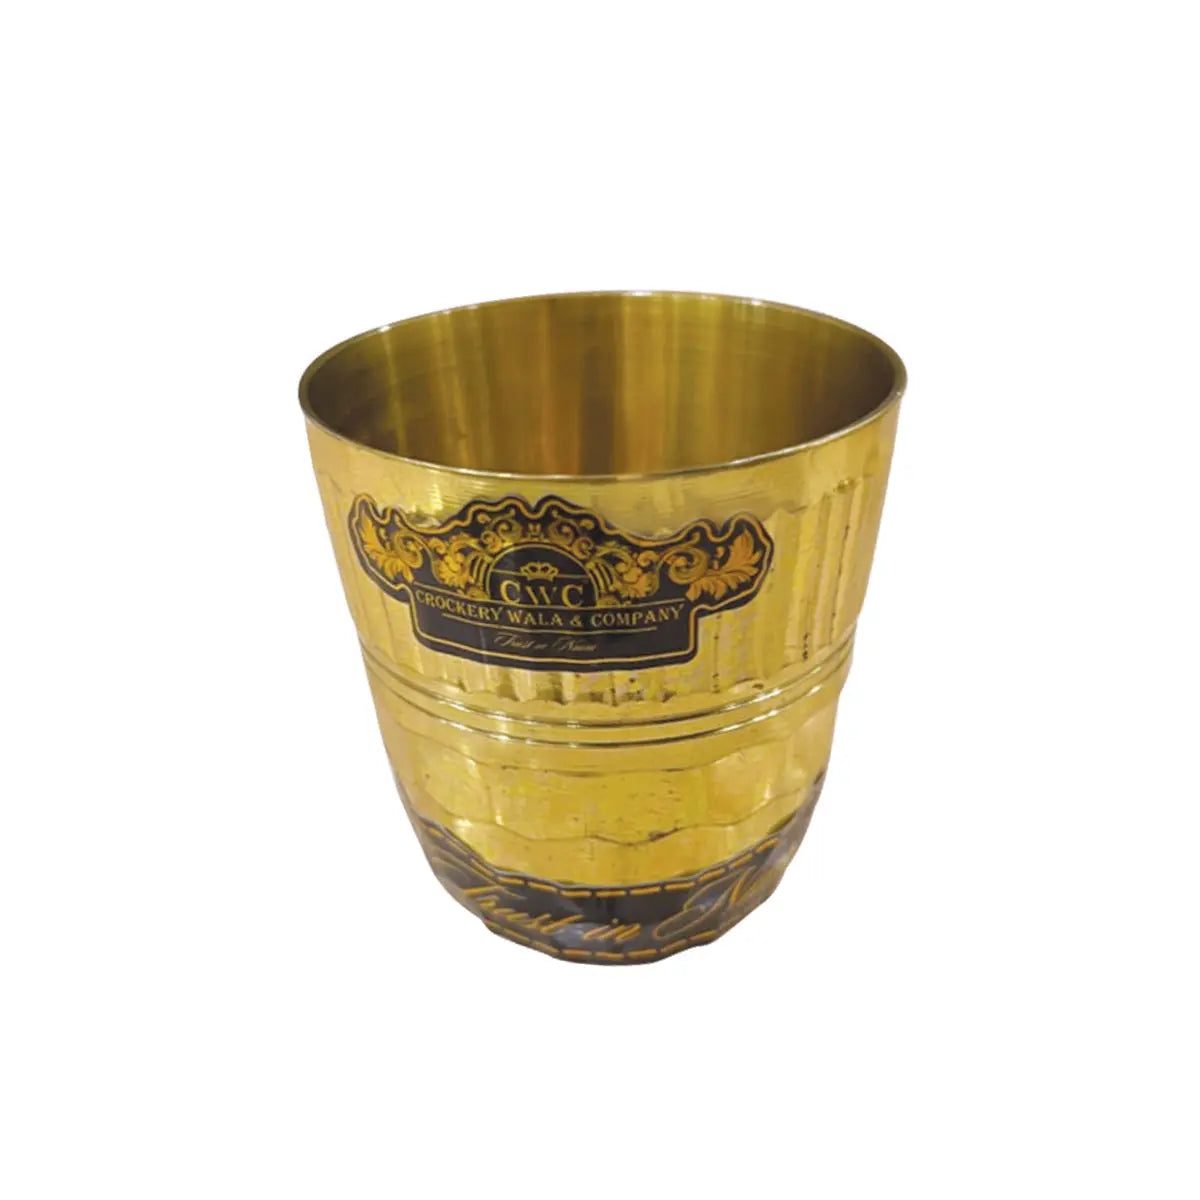 Pure Brass Bee Hive Design Glass Tumbler for Drinking and Serving Water Big - CROCKERY WALA AND COMPANY 